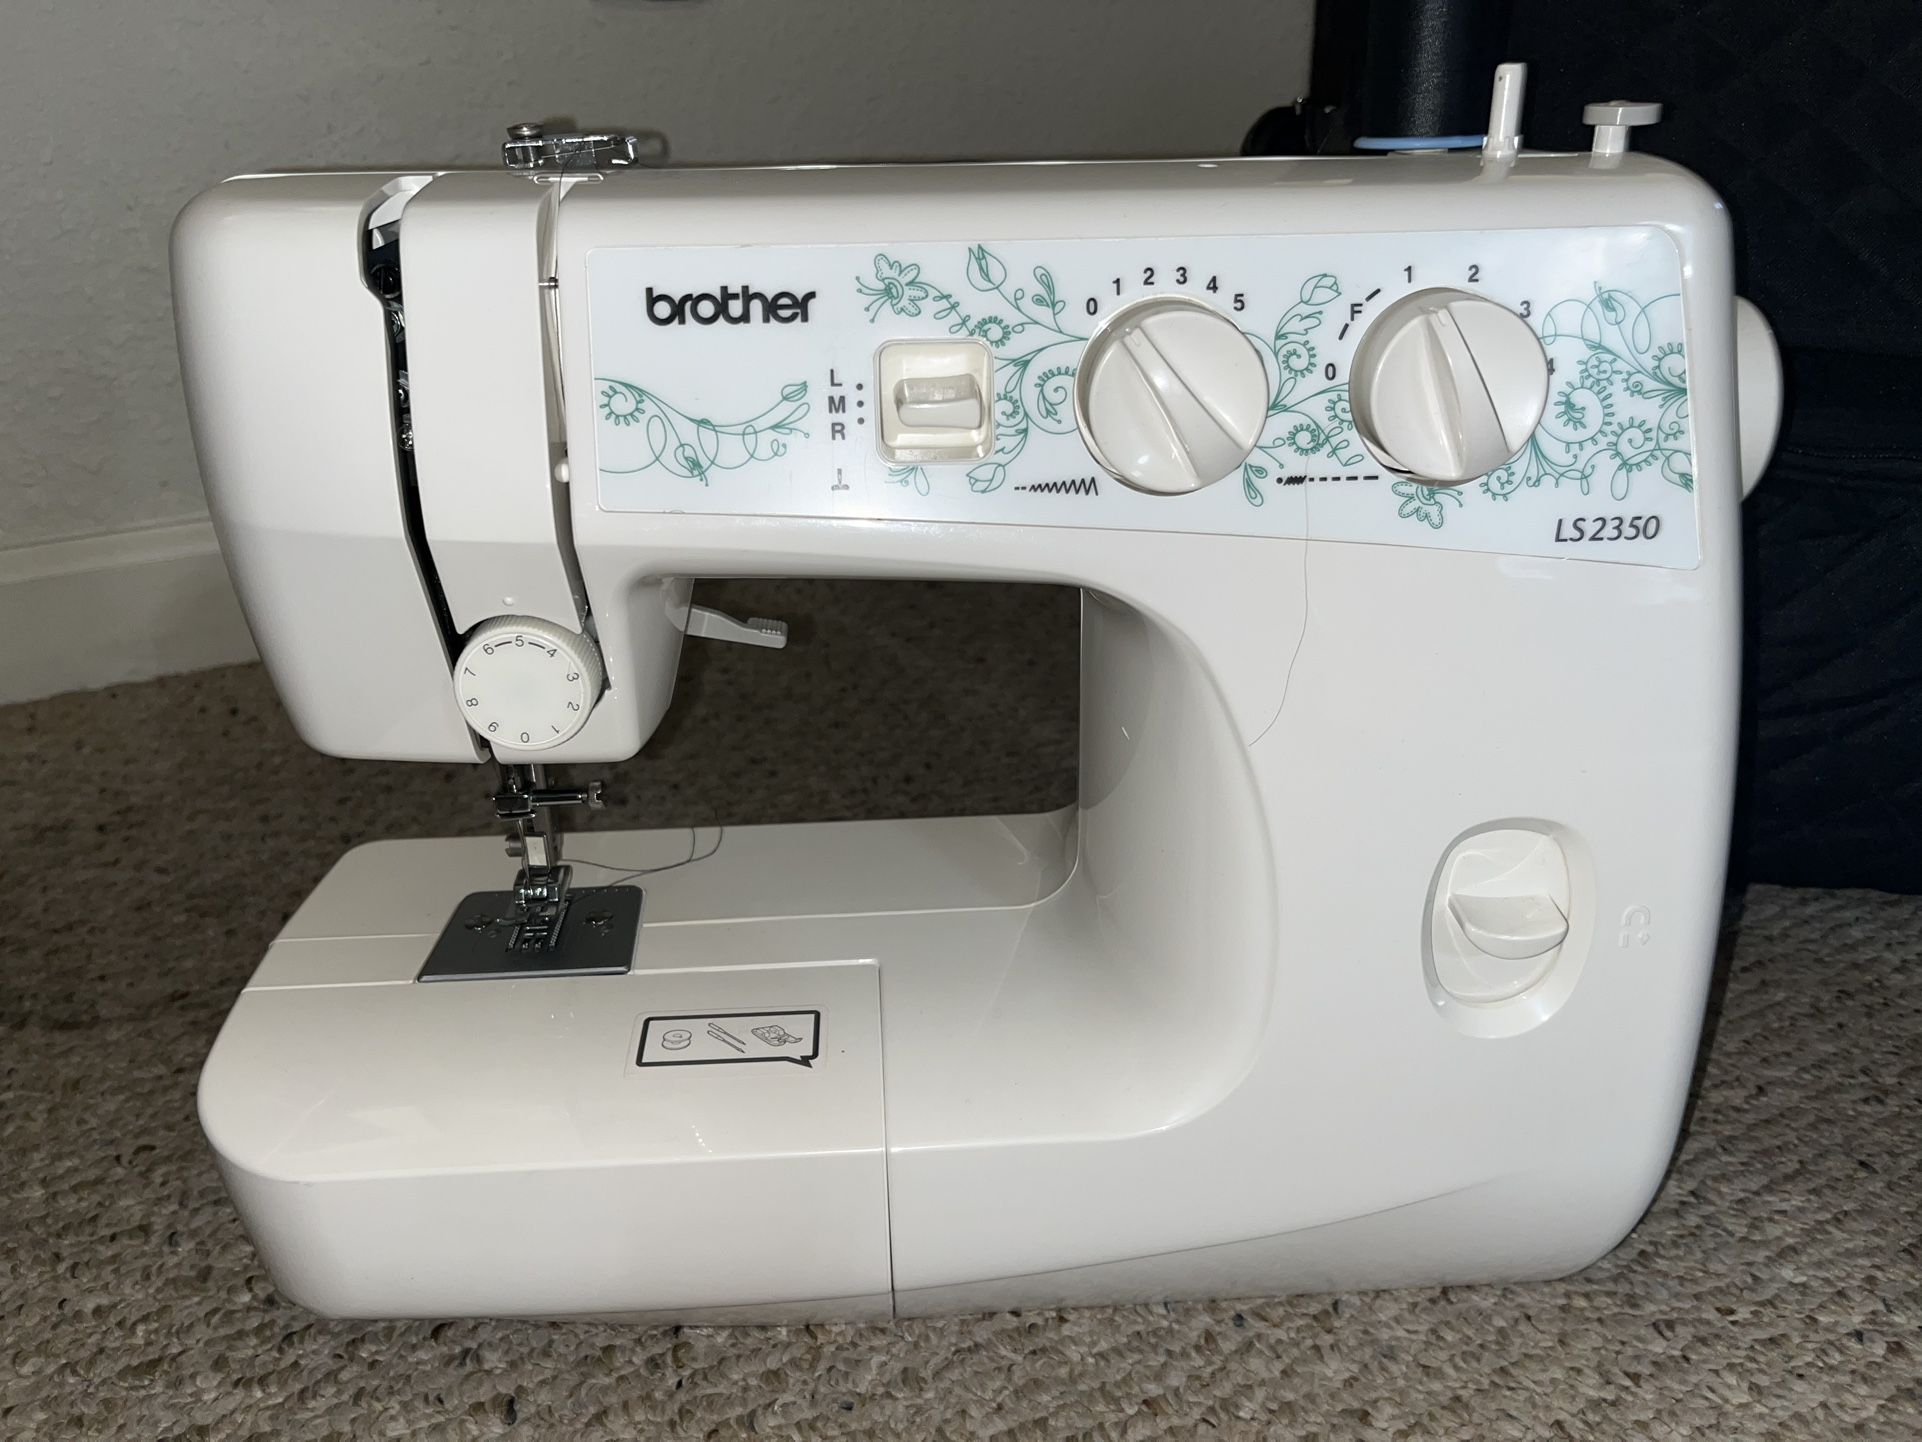 BROTHER Model LS2350 Sewing Machine